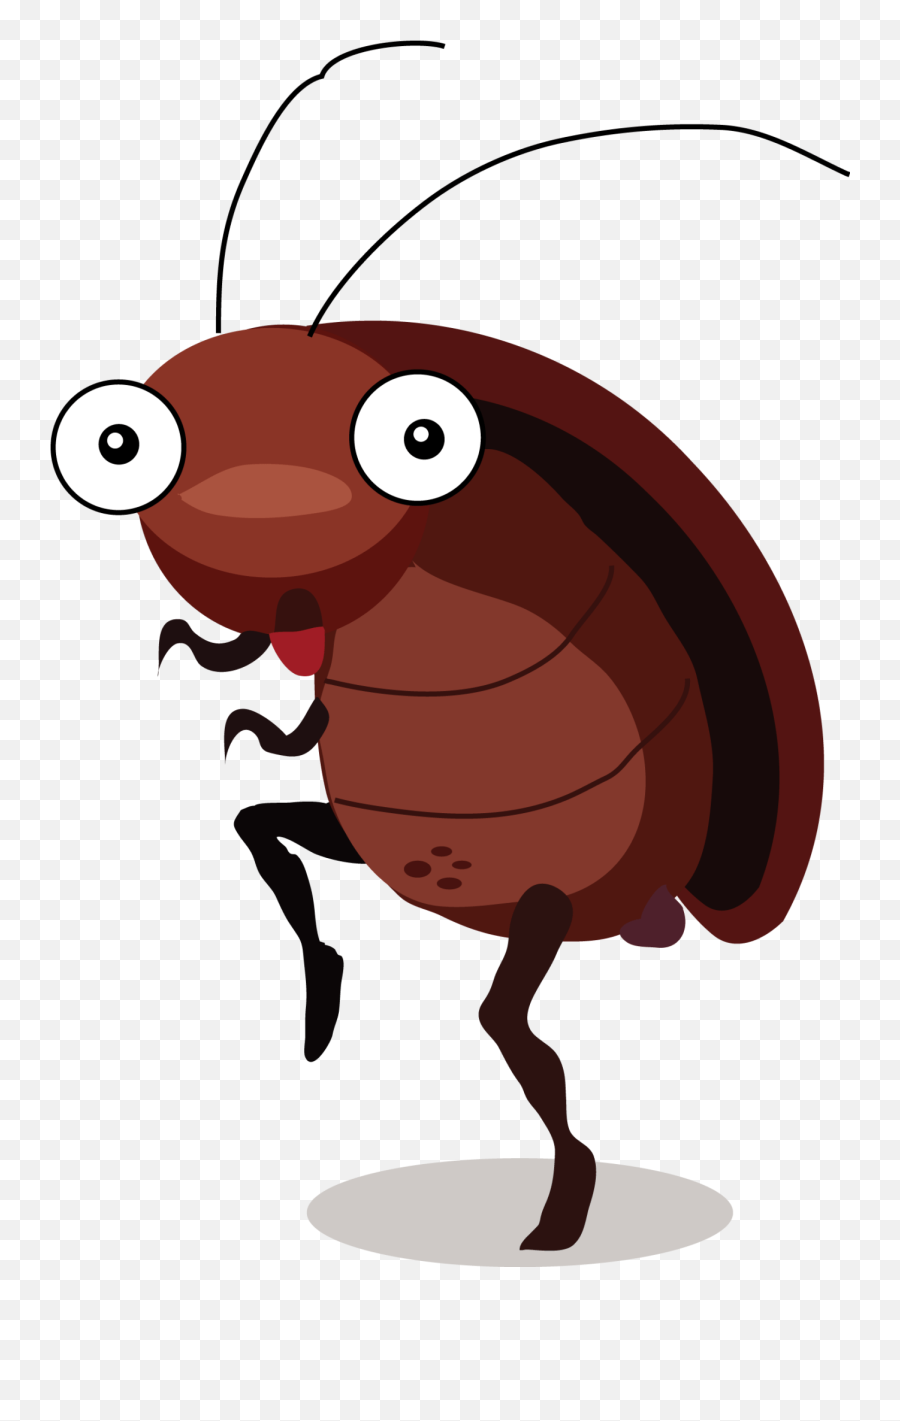 Please Arrive At Least 30 Mins To Closing - Cockroach Cockroach Illustration Emoji,Cockroach Emoji